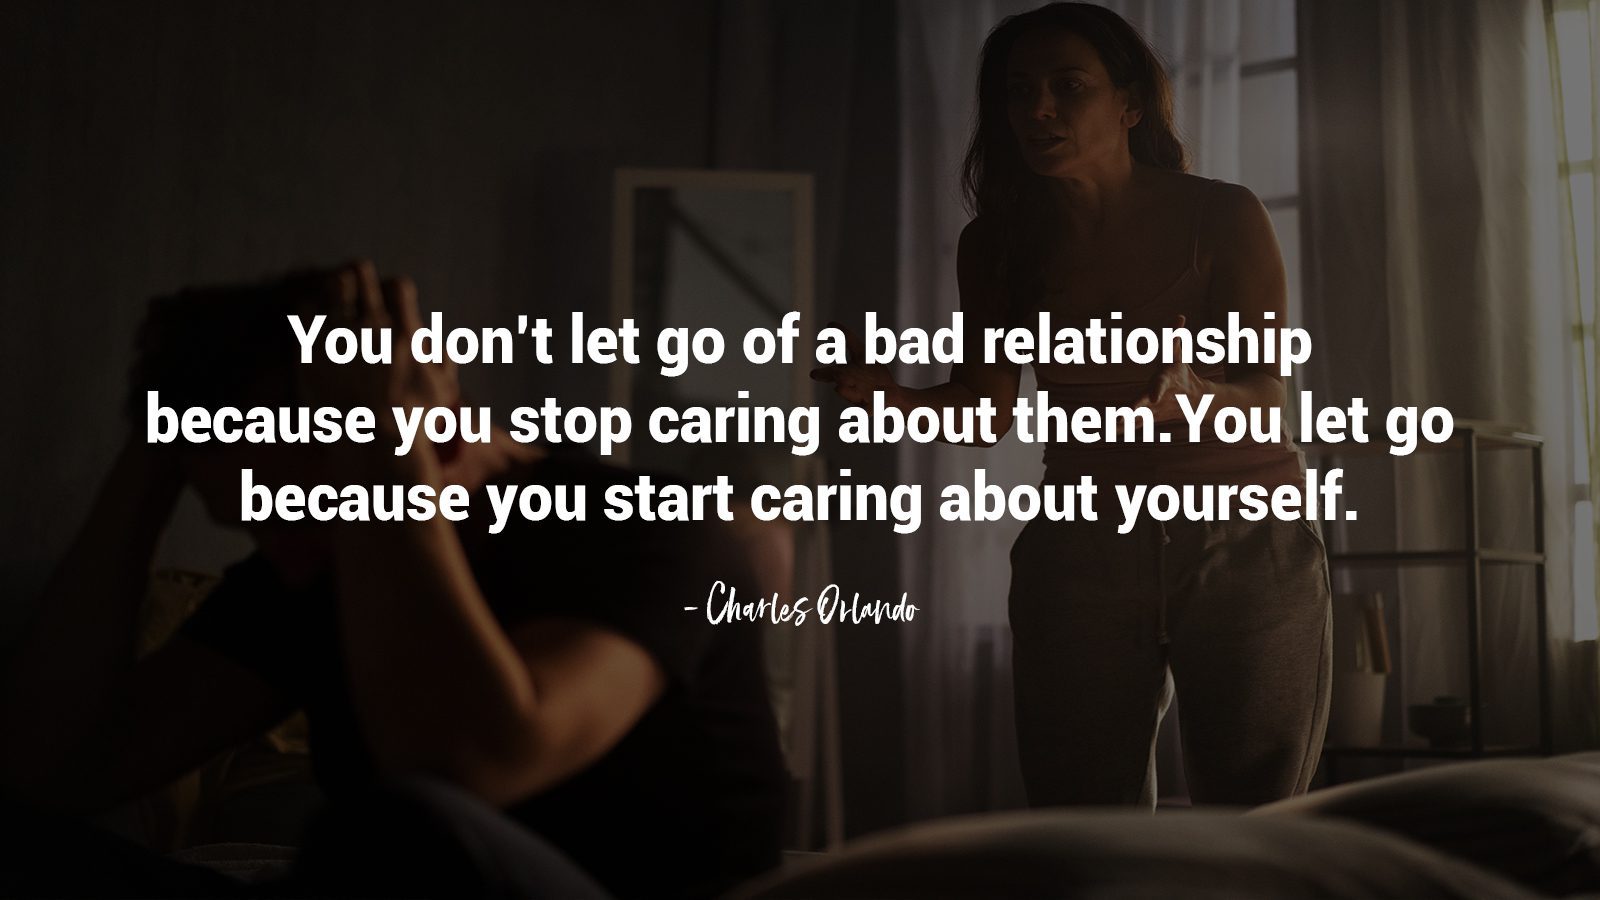 15 Quotes to Remember When Leaving an Unstable Relationship